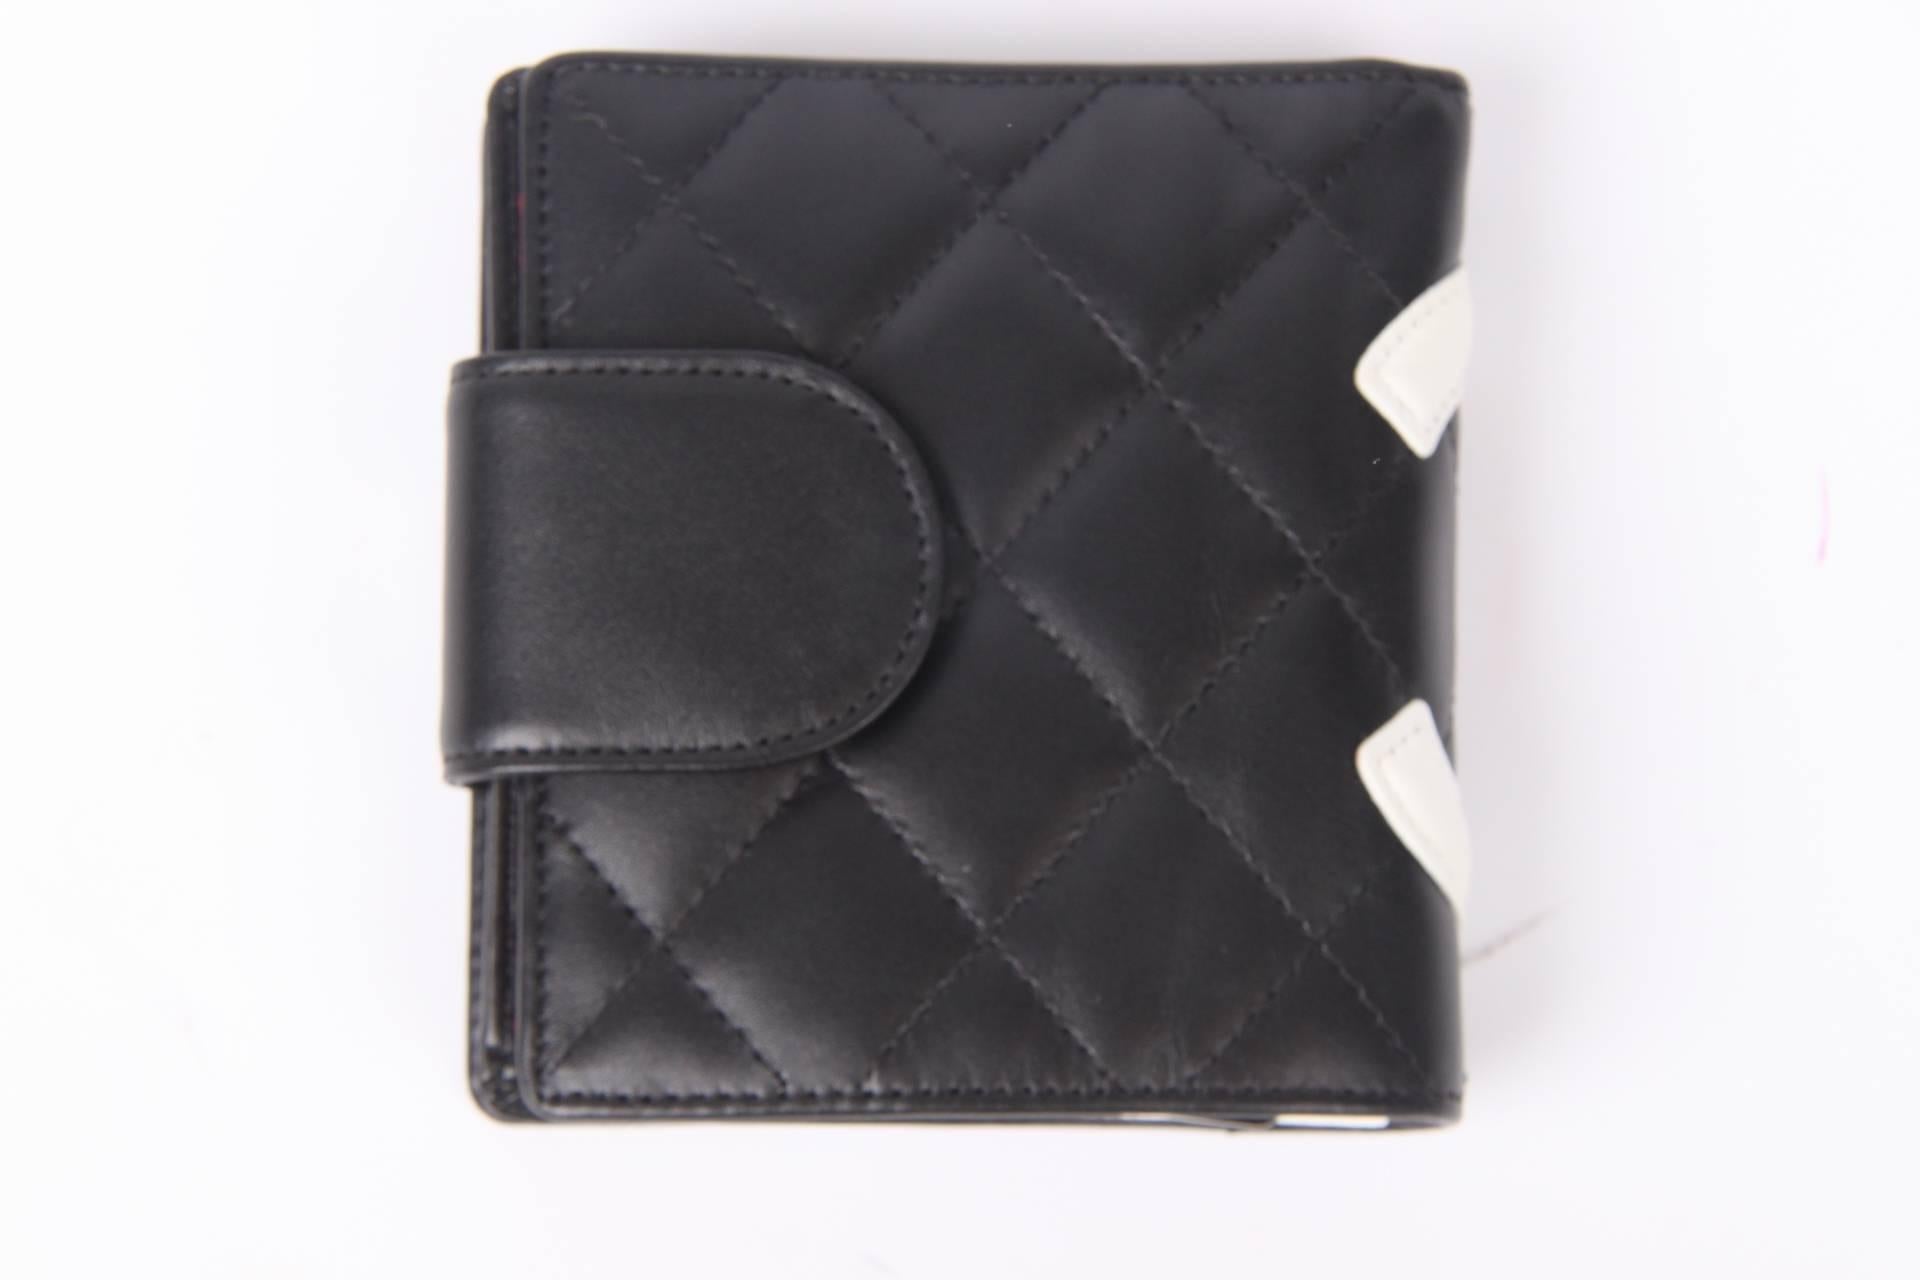 This one is brand new and fantastic! It is the Chanel Quilted Ligne Cambon Billfold Compact Wallet in black and white leather.

The black leather is fully quilted and has a large stitched CC logo in white. On the inside lining in bright pink covered